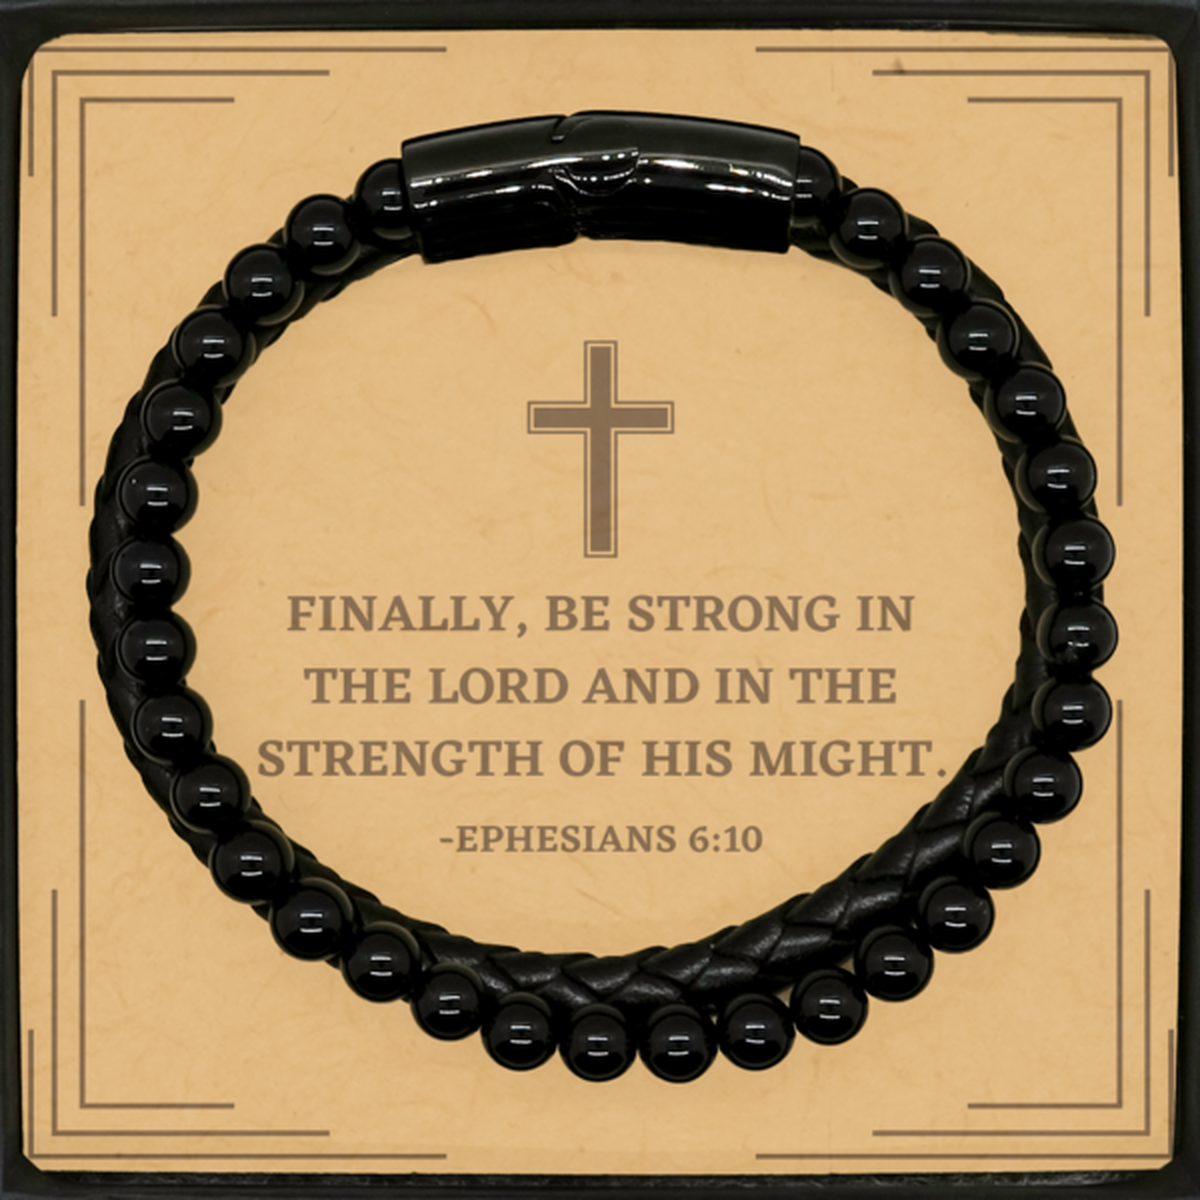 Baptism Gifts For Teenage Boys Girls, Christian Bible Verse Stone Leather Bracelet, Finally, be strong in the Lord Confirmation Gifts, Bible Verse Card for Son, Godson, Grandson